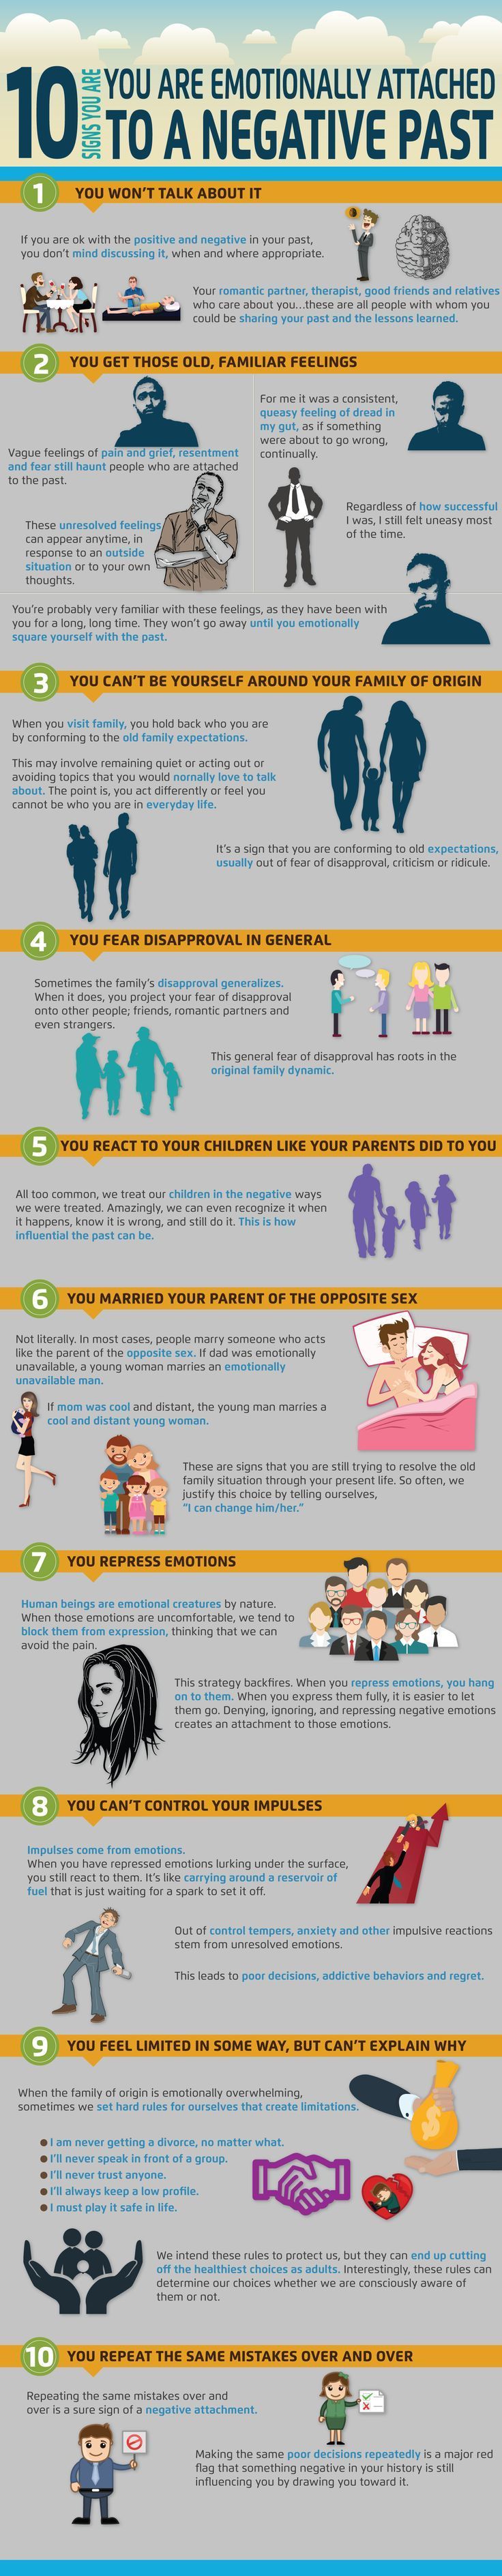 1568703774_522_Psychology-Infographic-10-Signs-You’re-Attached-to-the-Past Psychology Infographic : 10 Signs You’re Attached to the Past (Infographic)